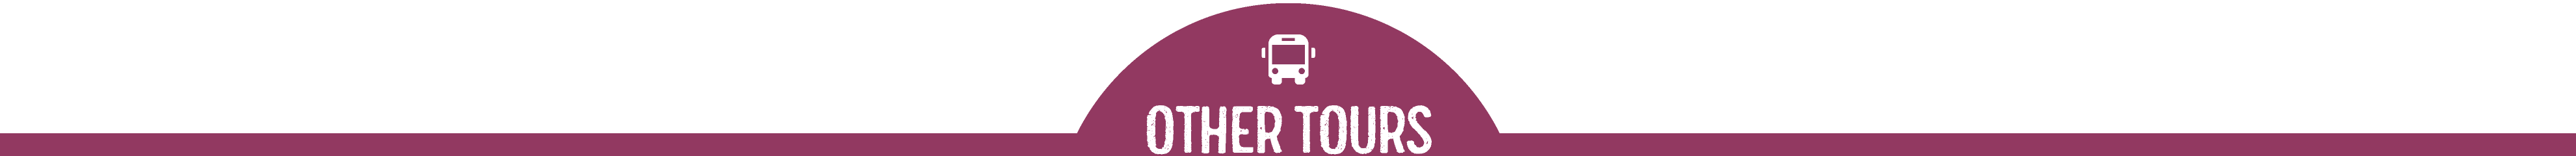 coach tours to jersey